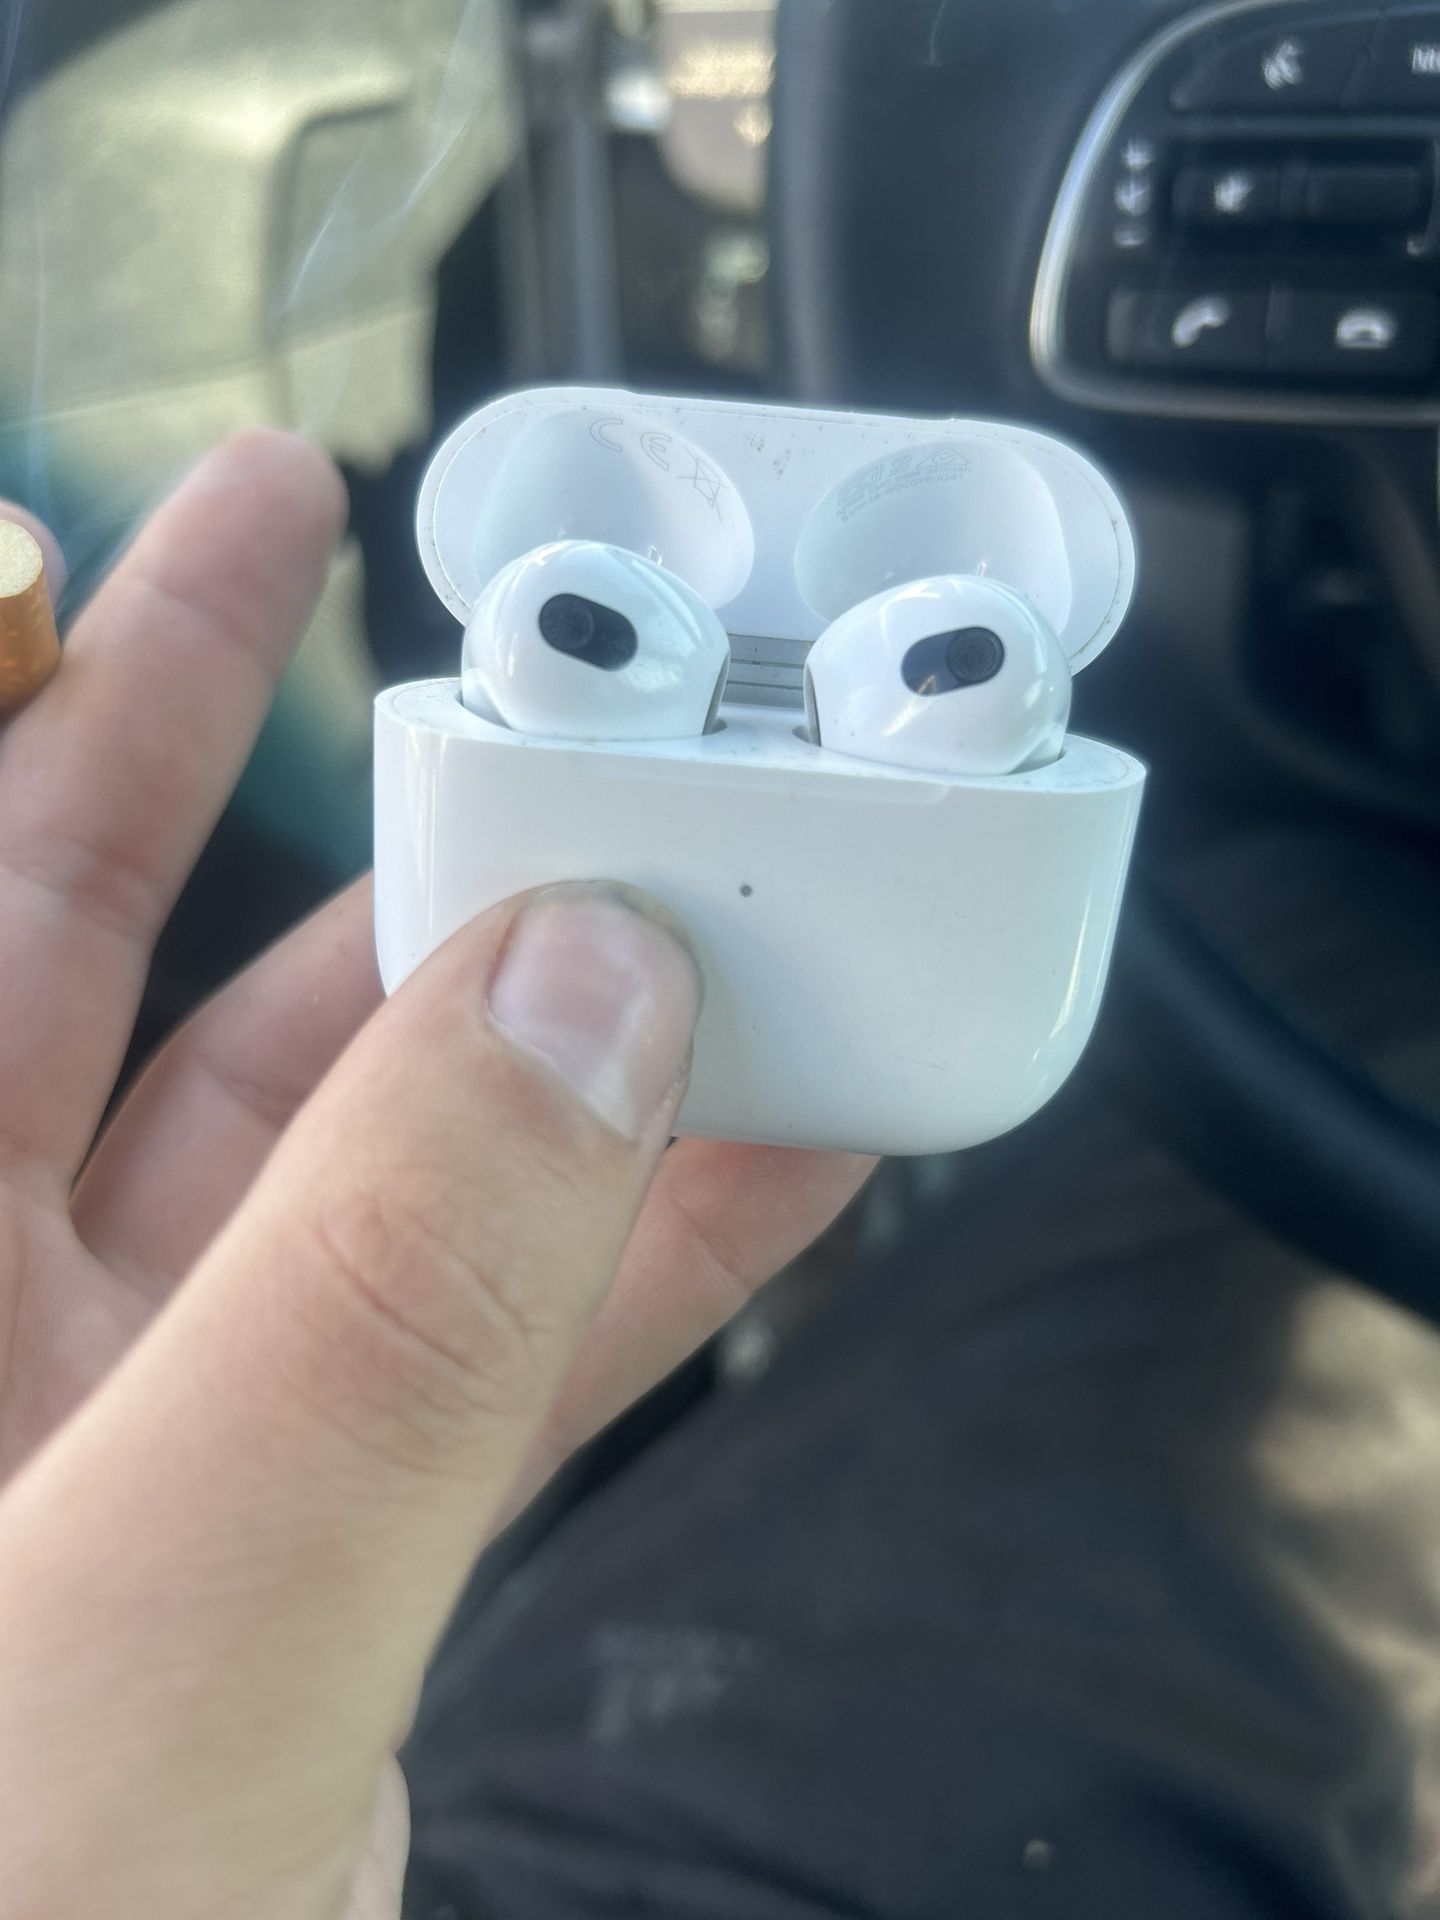 AirPods Pro 3rd Generation 